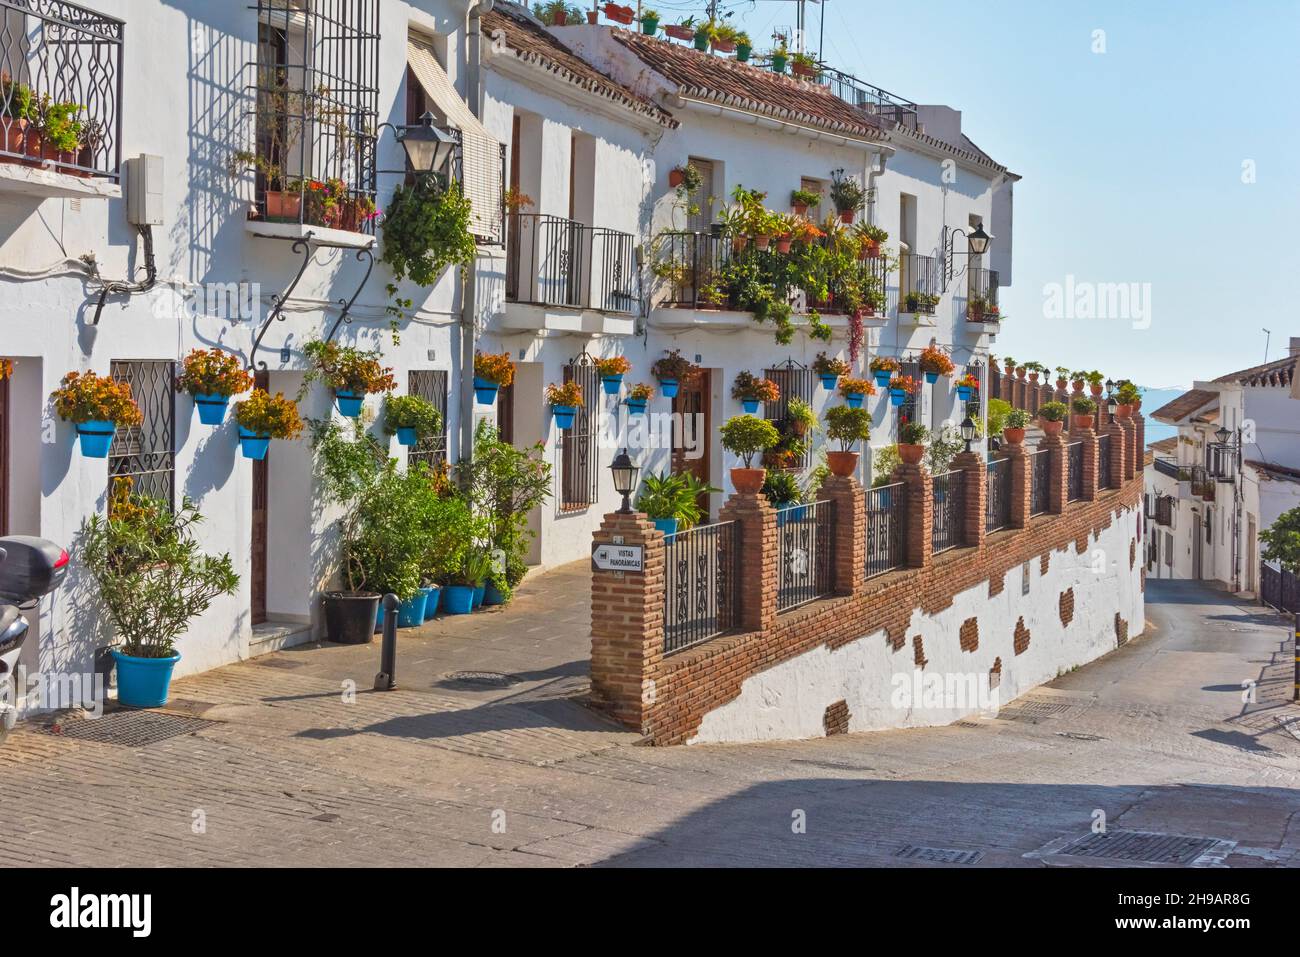 White houses decorated with flower pots, Mijas, Malaga Province, Andalusia Autonomous Community, Spain Stock Photo